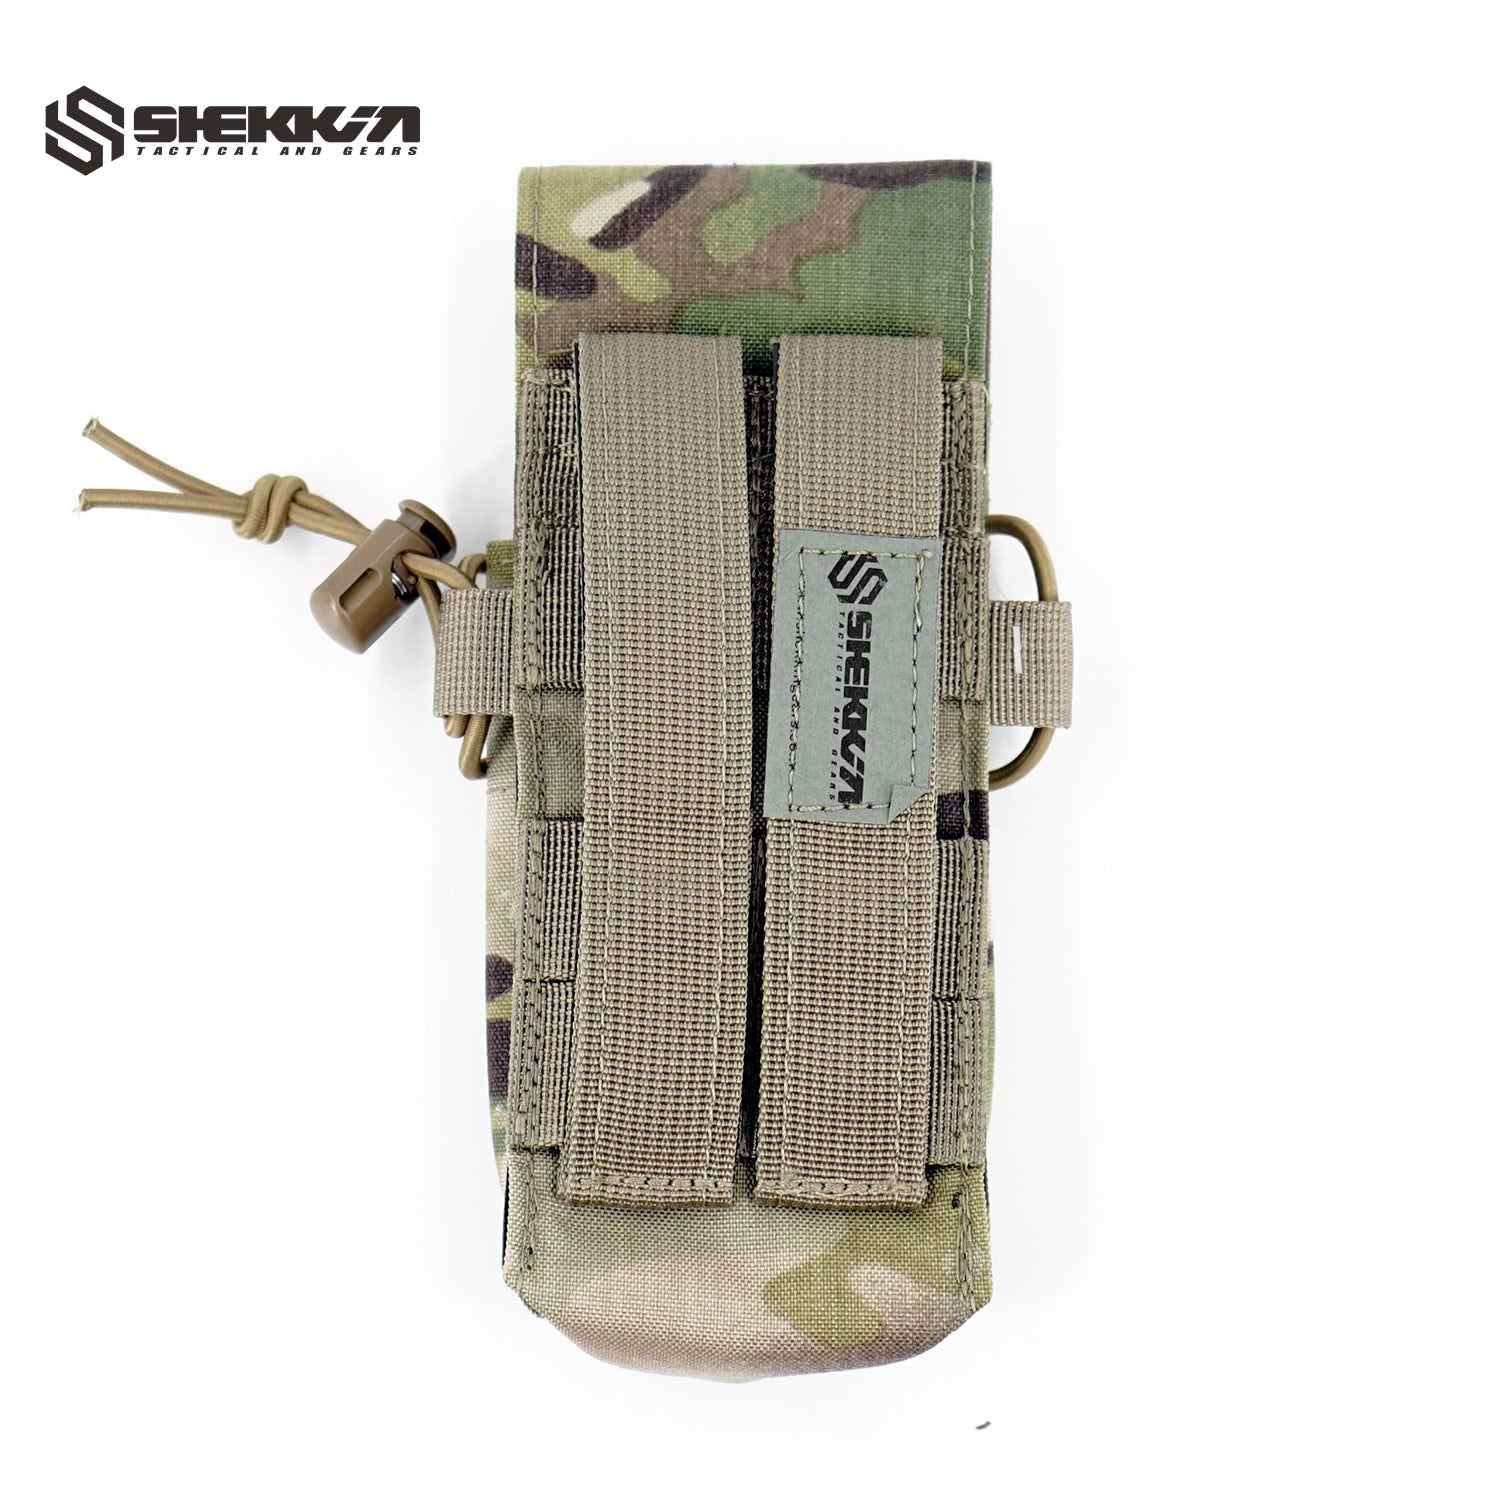 Shekkingears replica TT style tiered M4 556 mag Pouch